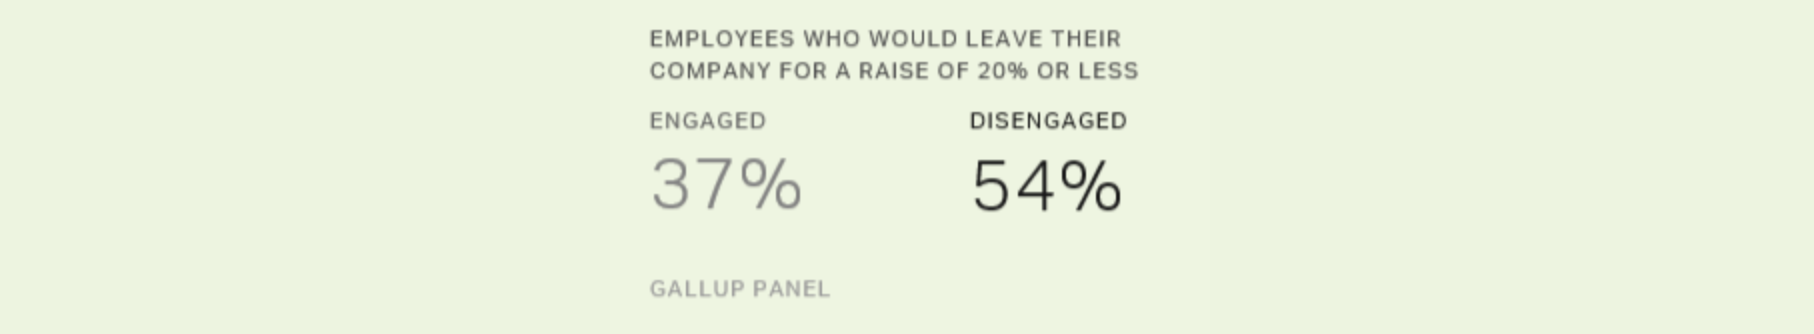 gallup poll on money for employees